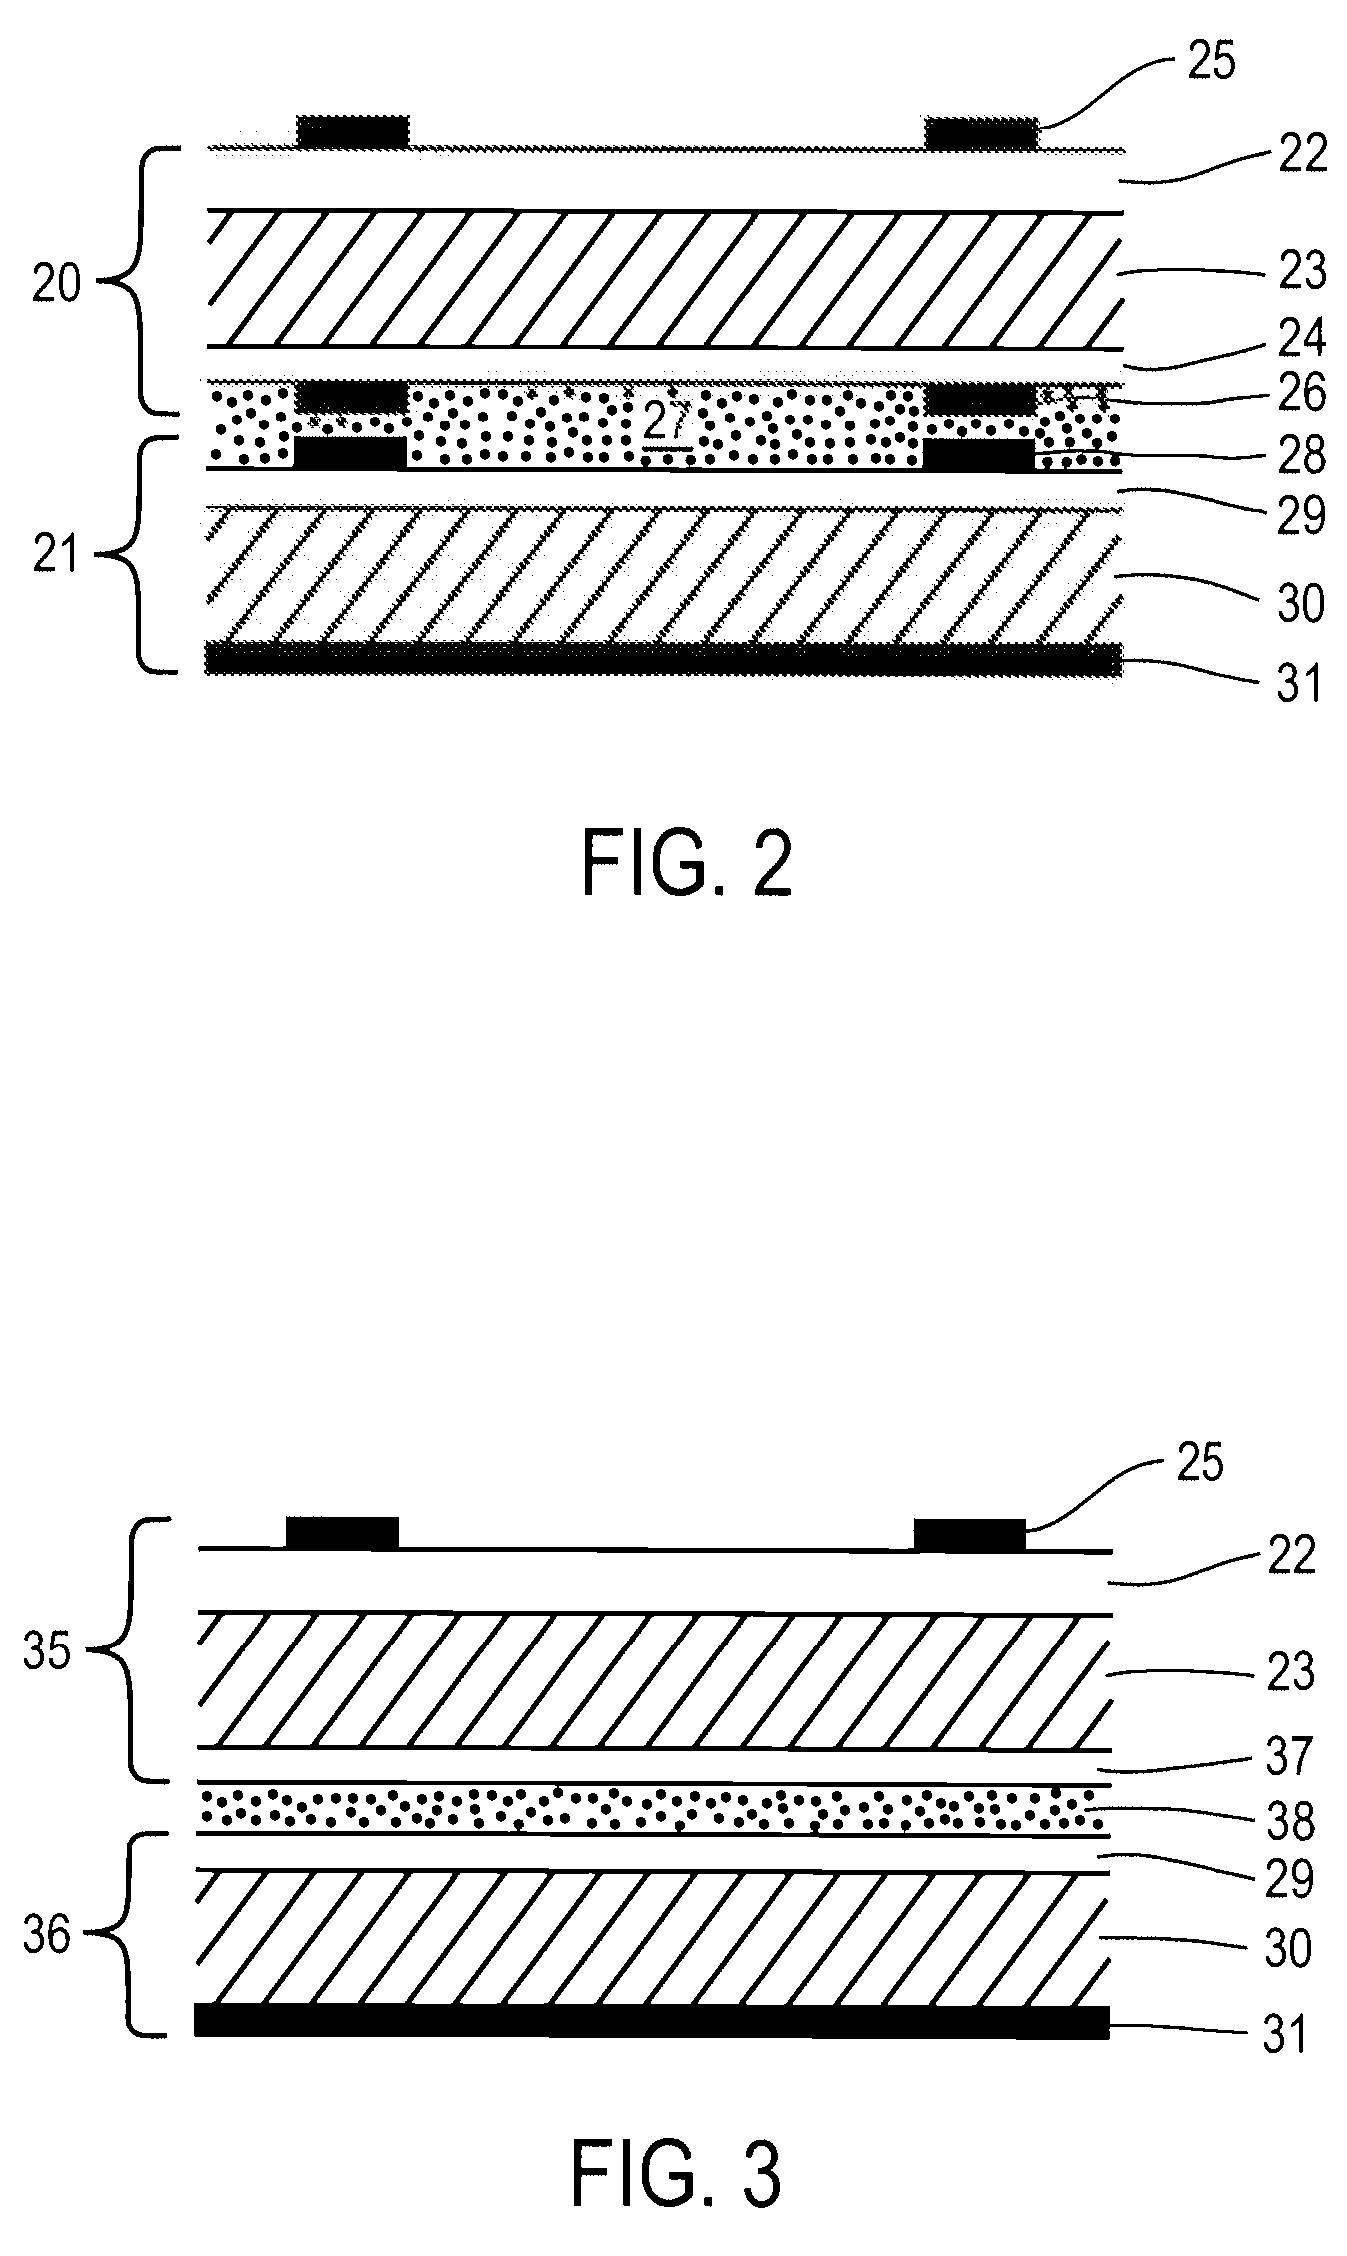 Tandem solar cell structures and methods of manufacturing same